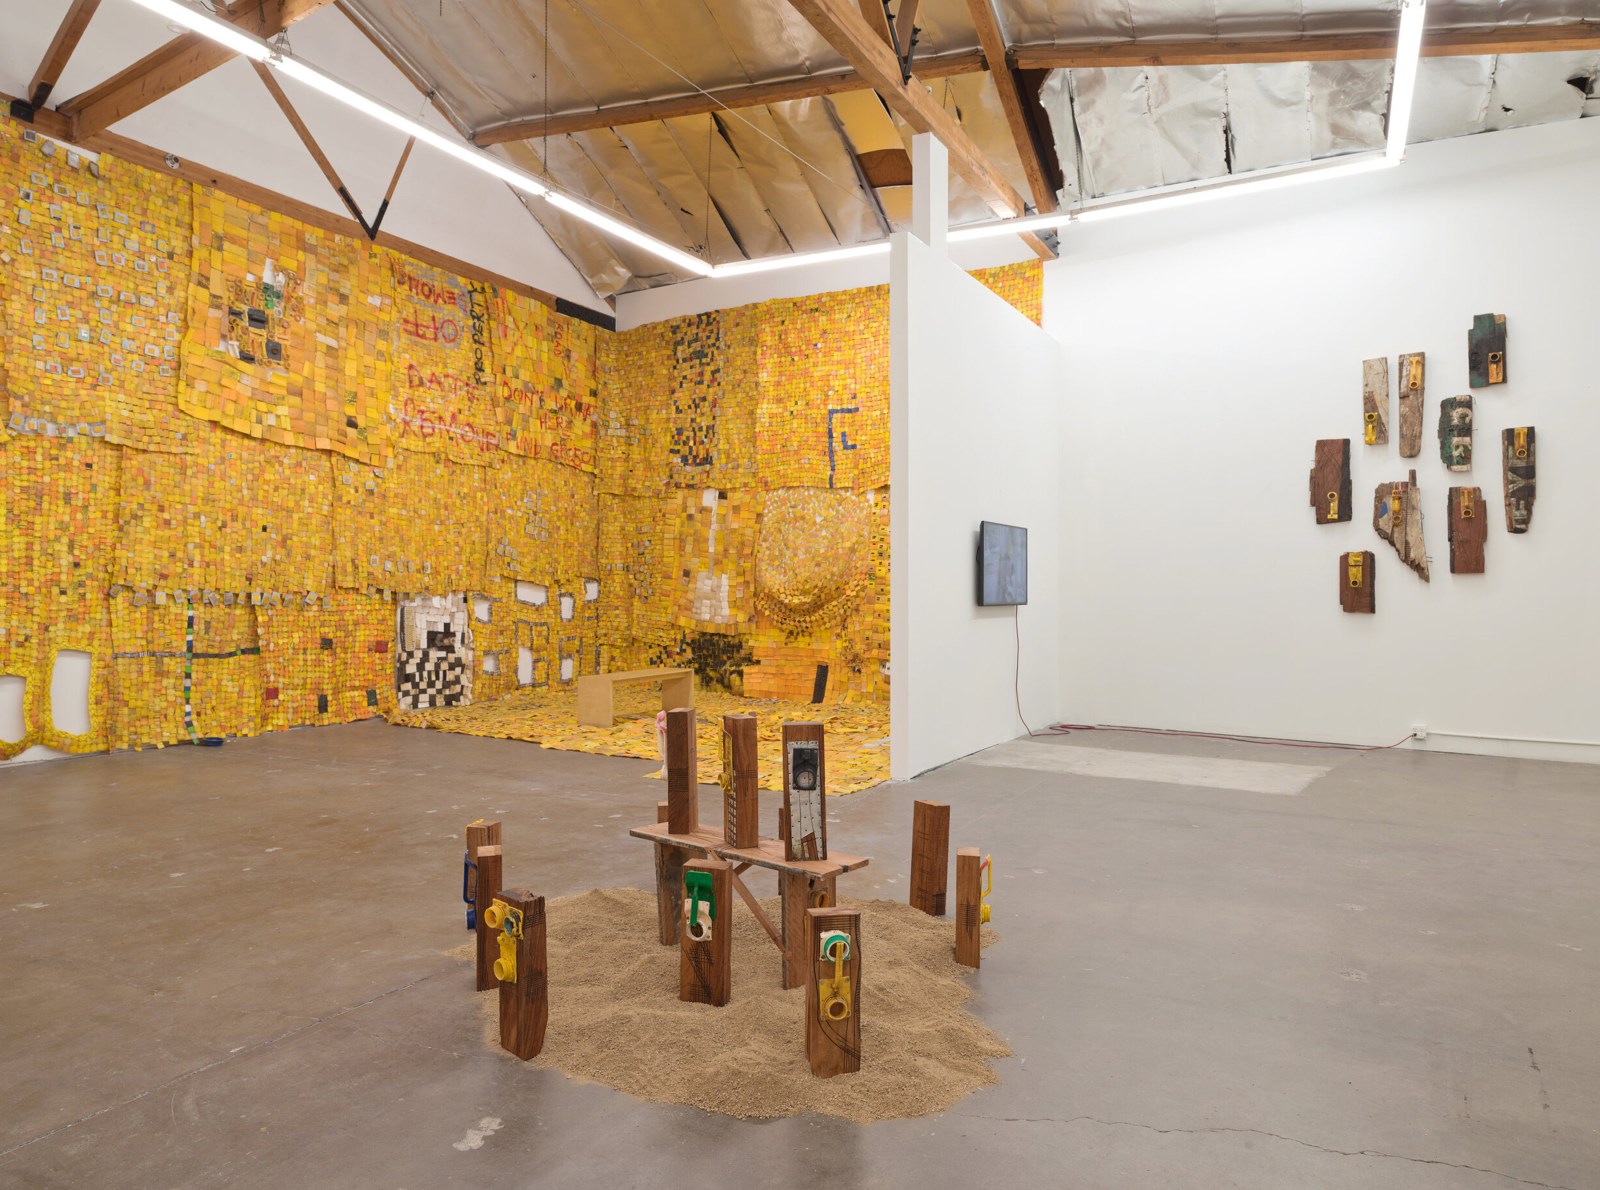 Serge Attukwei Clottey – Solo Chorus - The Mistake Room - Exhibitions - Simchowitz Gallery